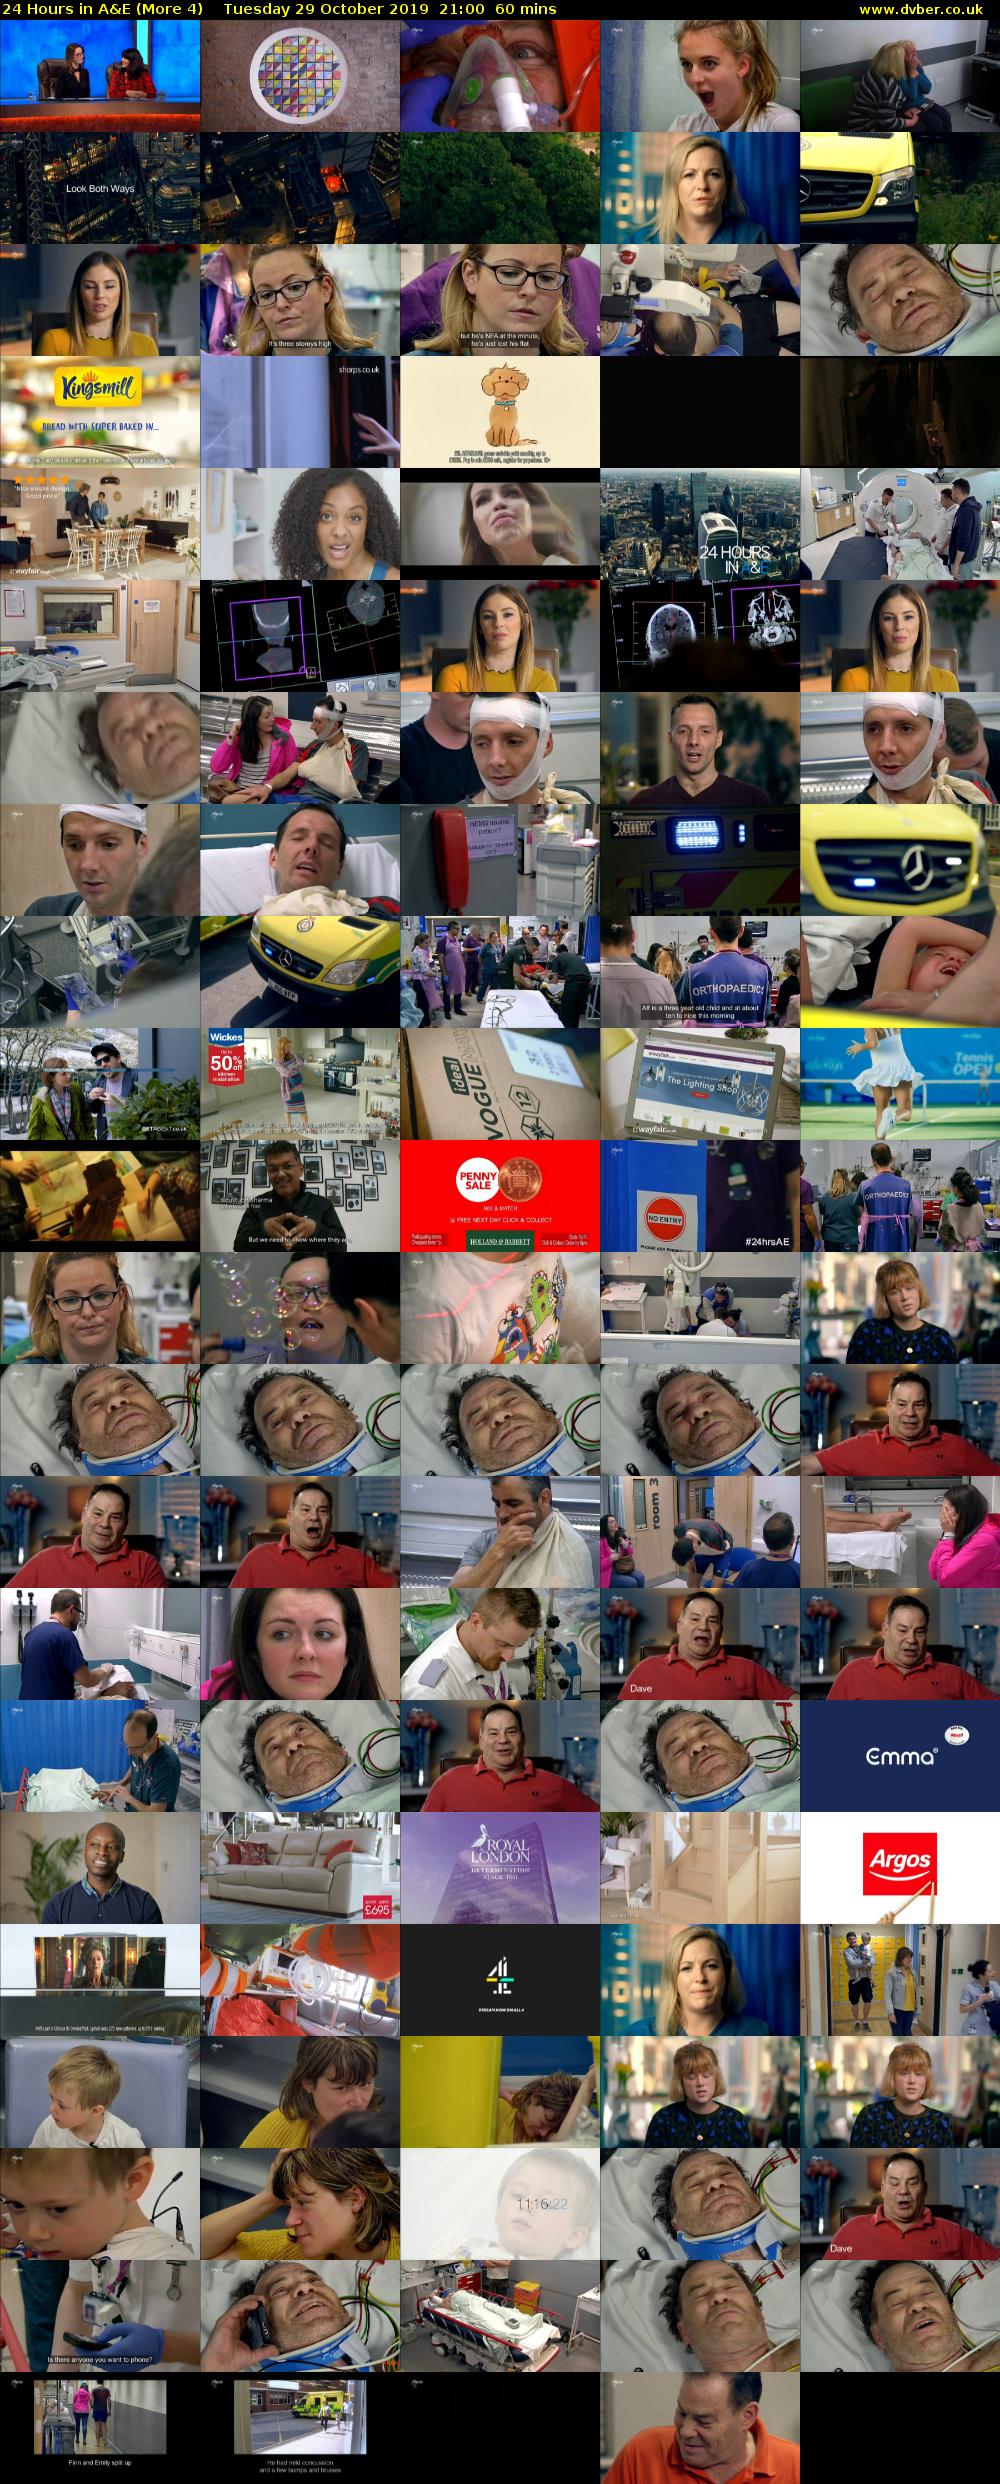 24 Hours in A&E (More 4) Tuesday 29 October 2019 21:00 - 22:00